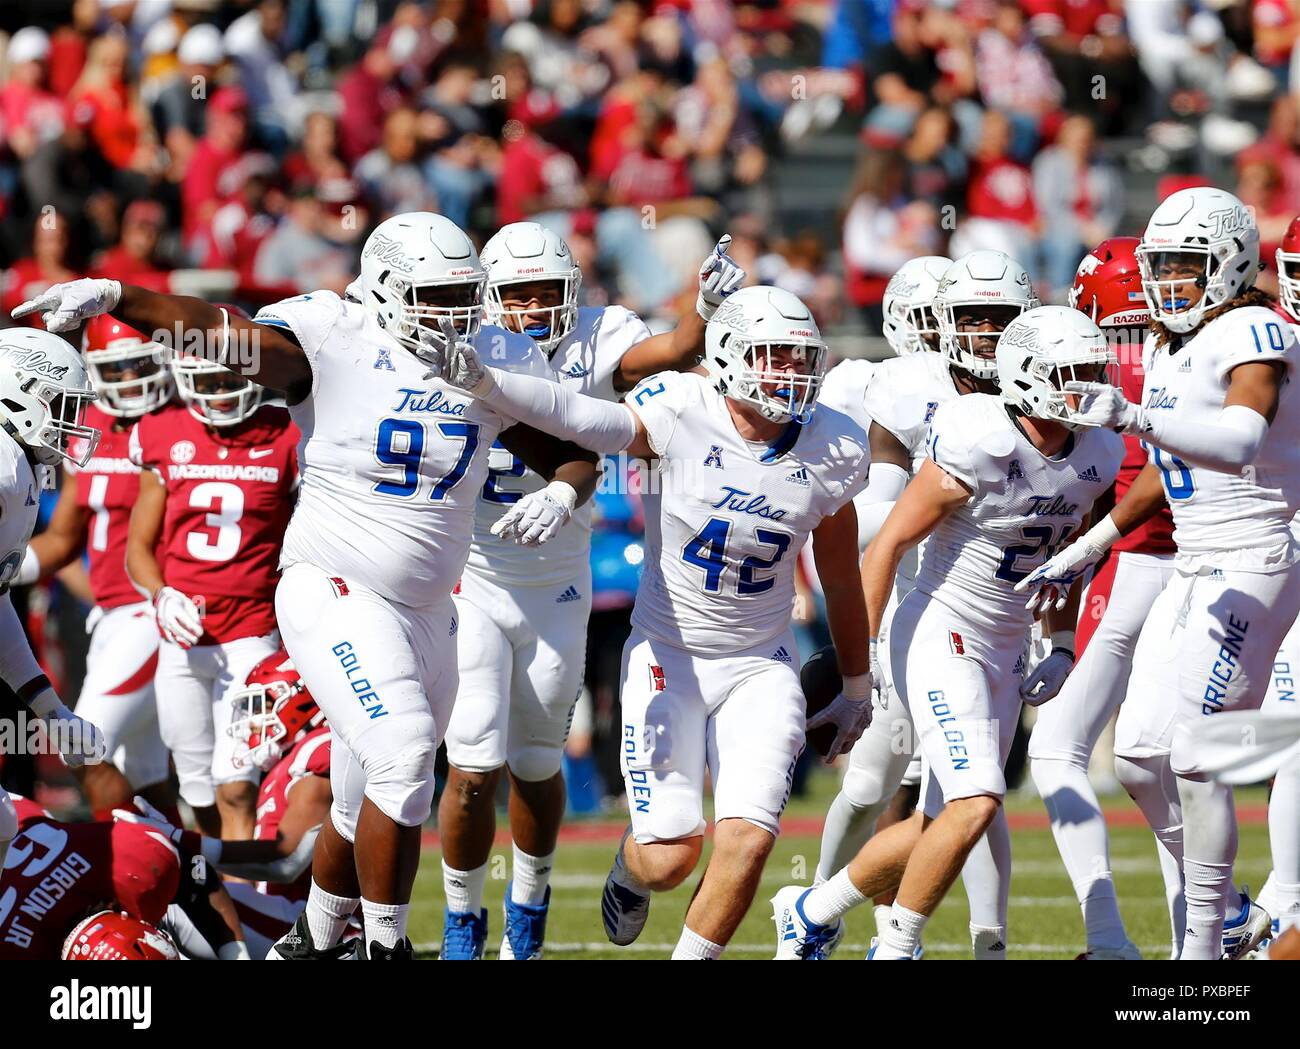 Oct 20, 2018: Tulsa defense members Tyarise Stevenson #97, Cooper Edmiston #42, Zaven Collins #23 and Manny Bunch #10 celebrate following a fumble recovery. Arkansas defeated Tulsa 23-0 at Donald W. Reynolds Stadium in Fayetteville, AR, Richey Miller/CSM Stock Photo